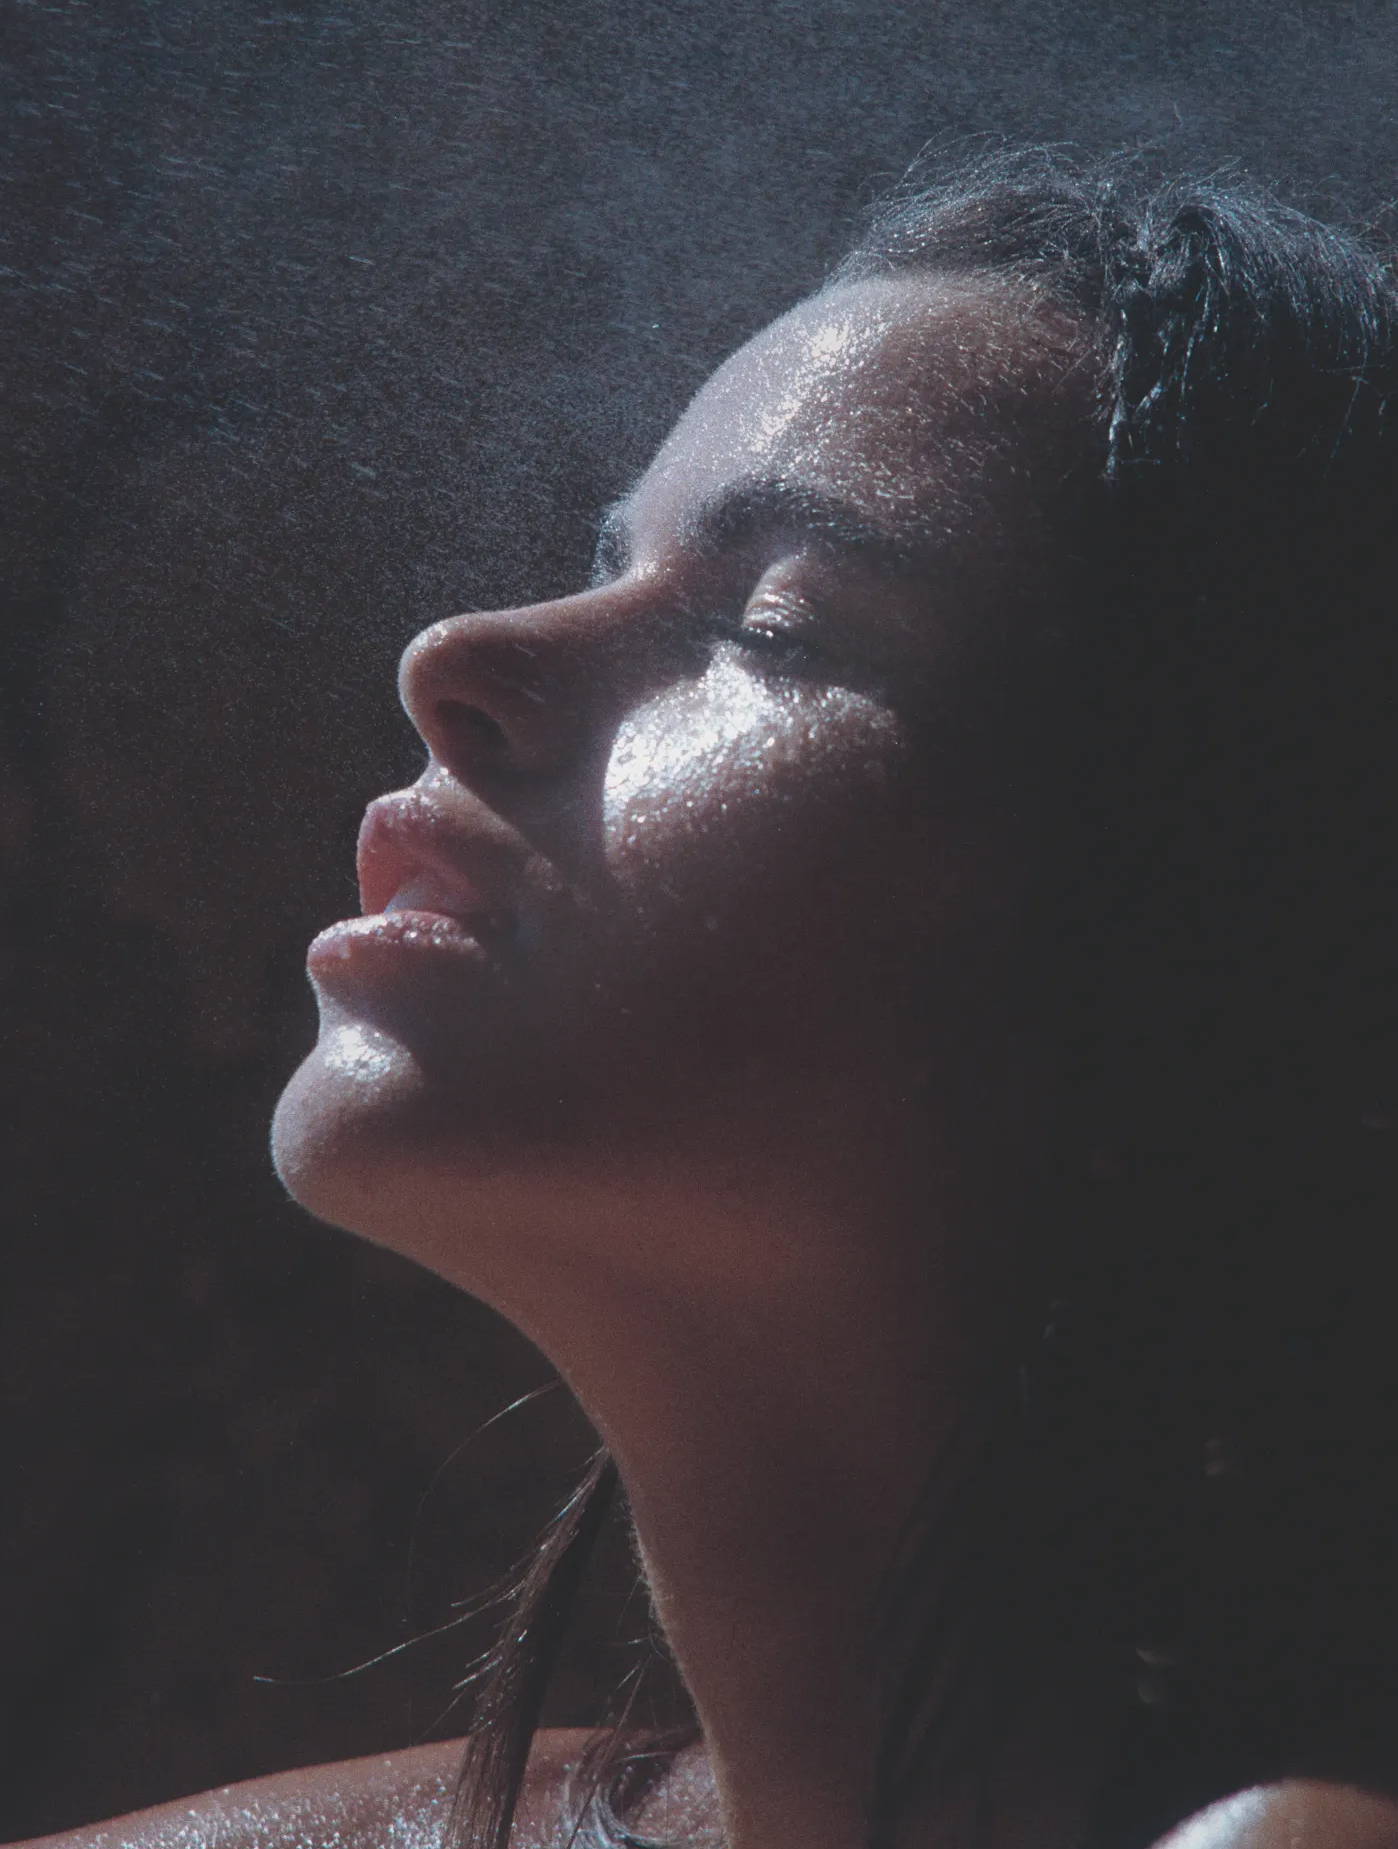 A person's face relaxing under a veil of mist against a dark background.